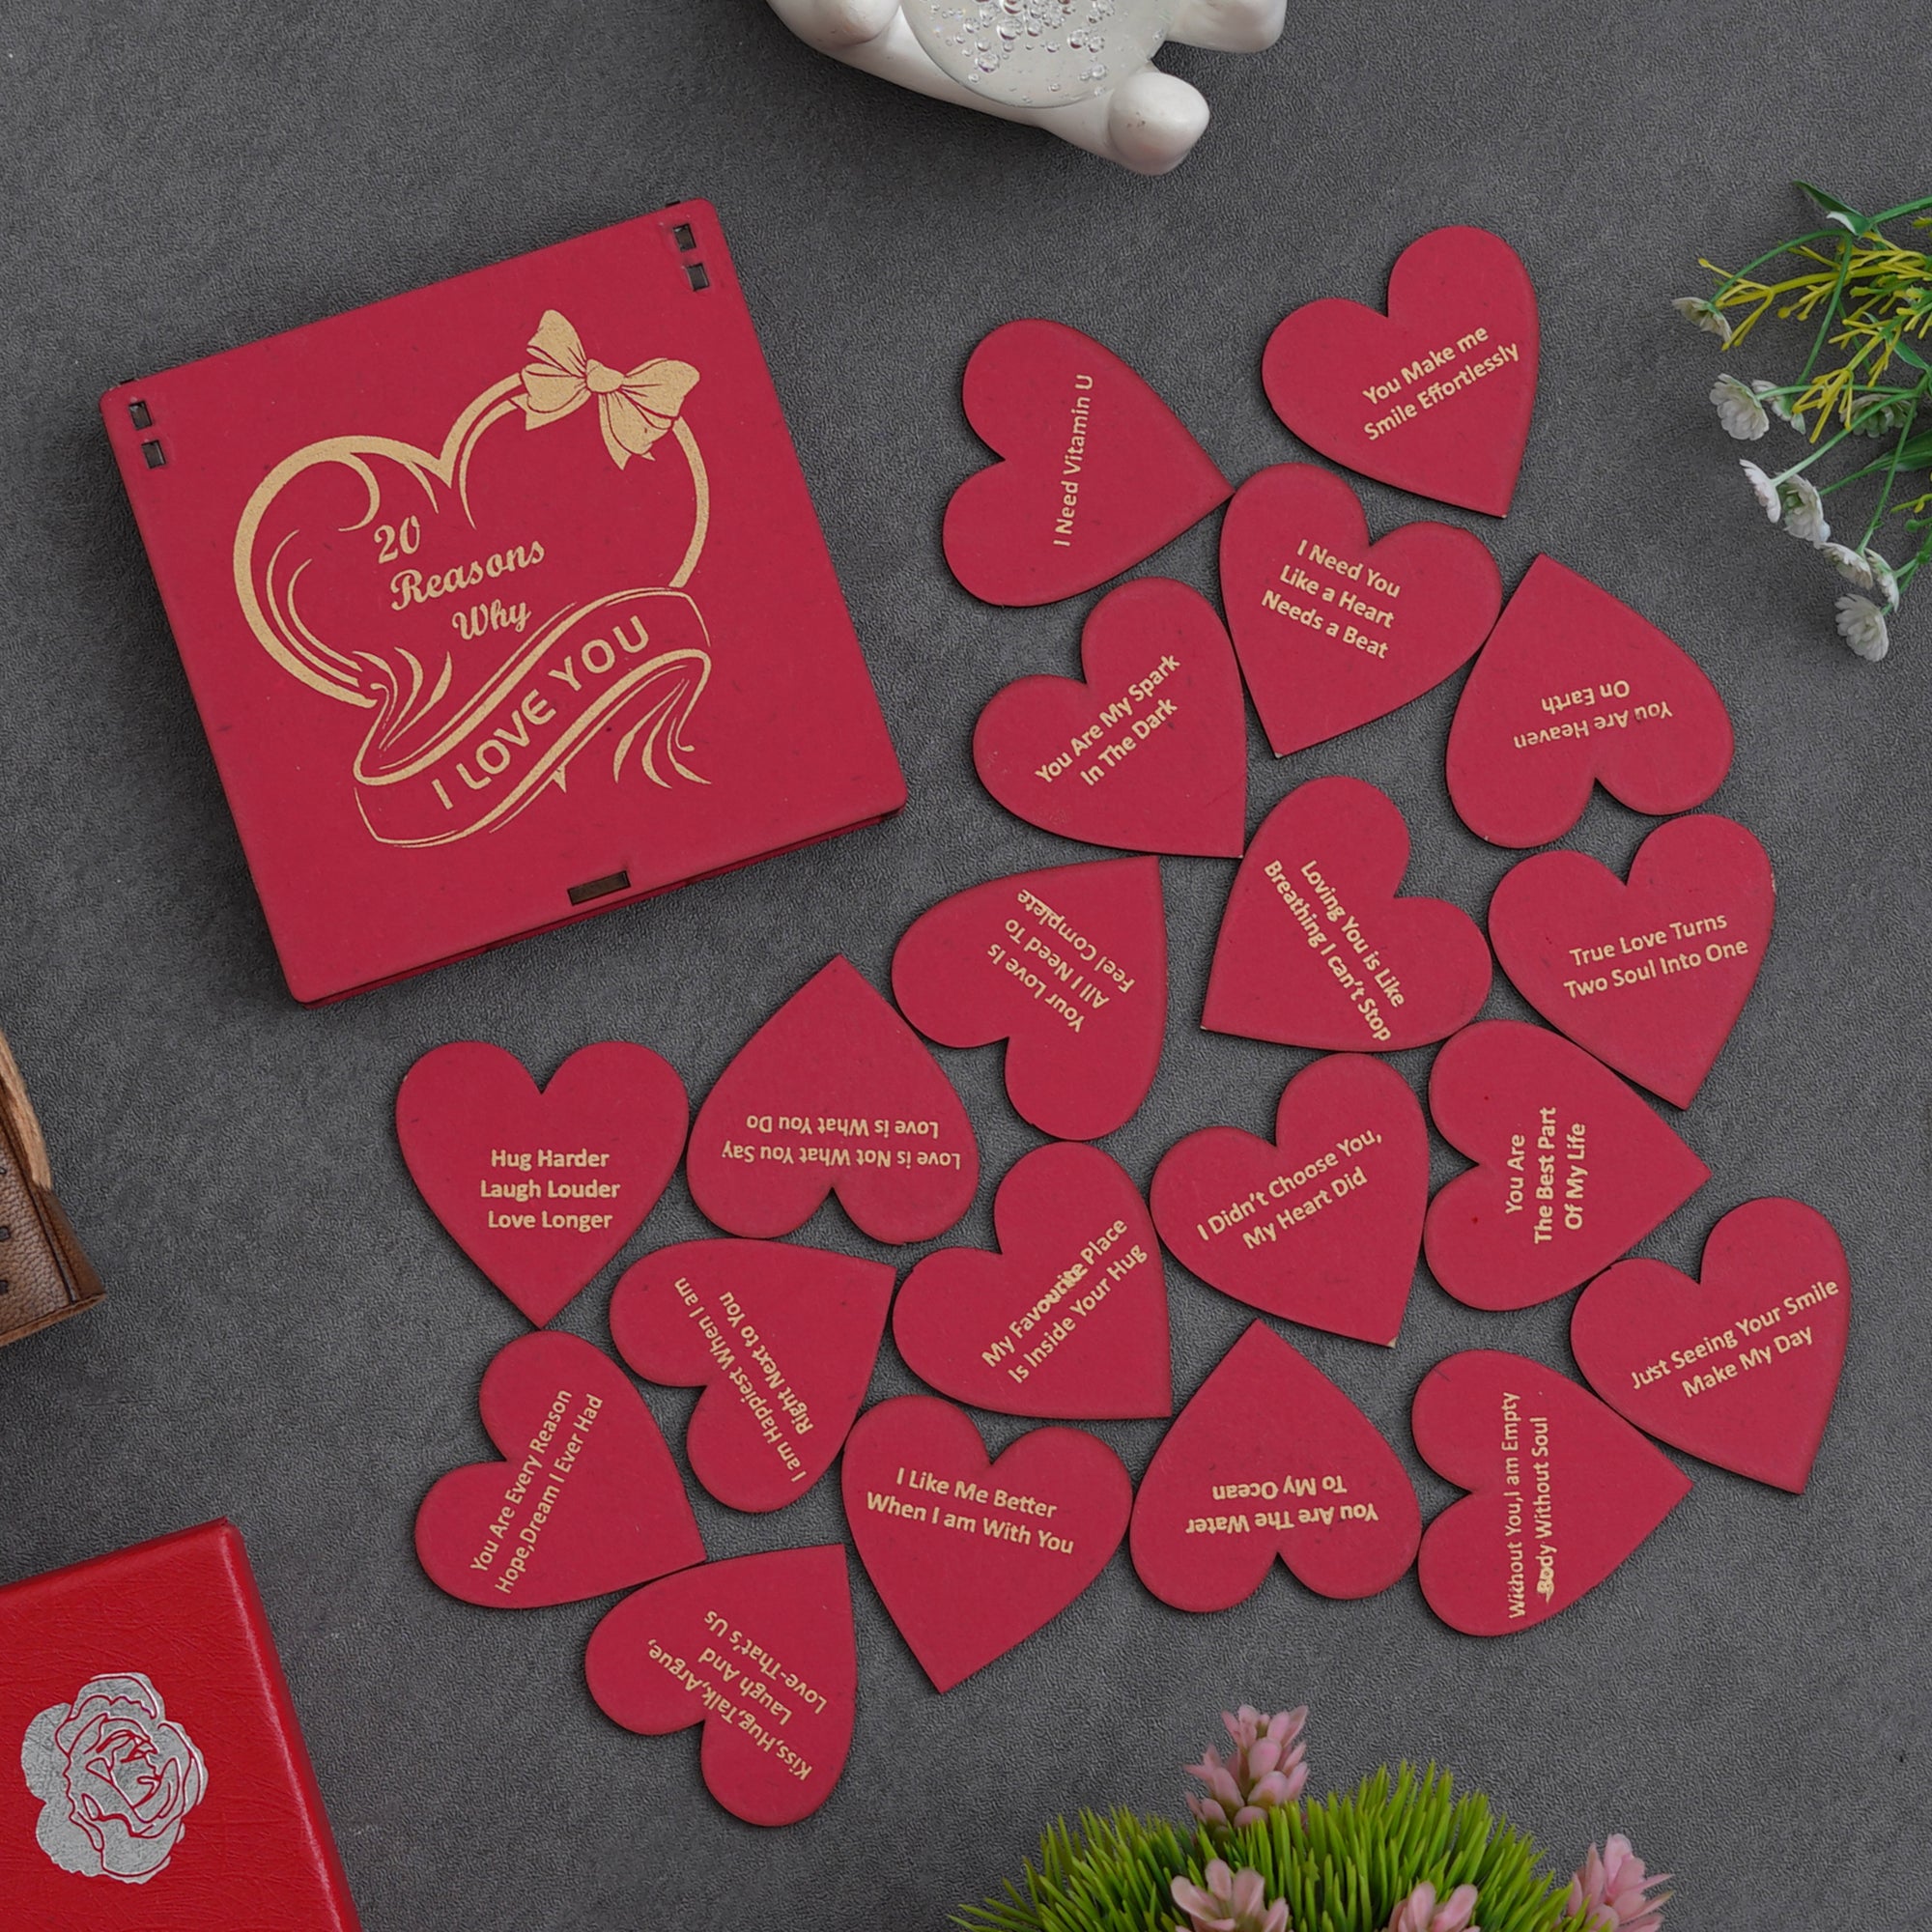 Valentine Combo of Pack of 12 Love Coupons Gift Cards Set, Golden Red Rose Gift Set, "20 Reasons Why I Love You" Printed on Little Red Hearts Decorative Wooden Gift Set Box 5